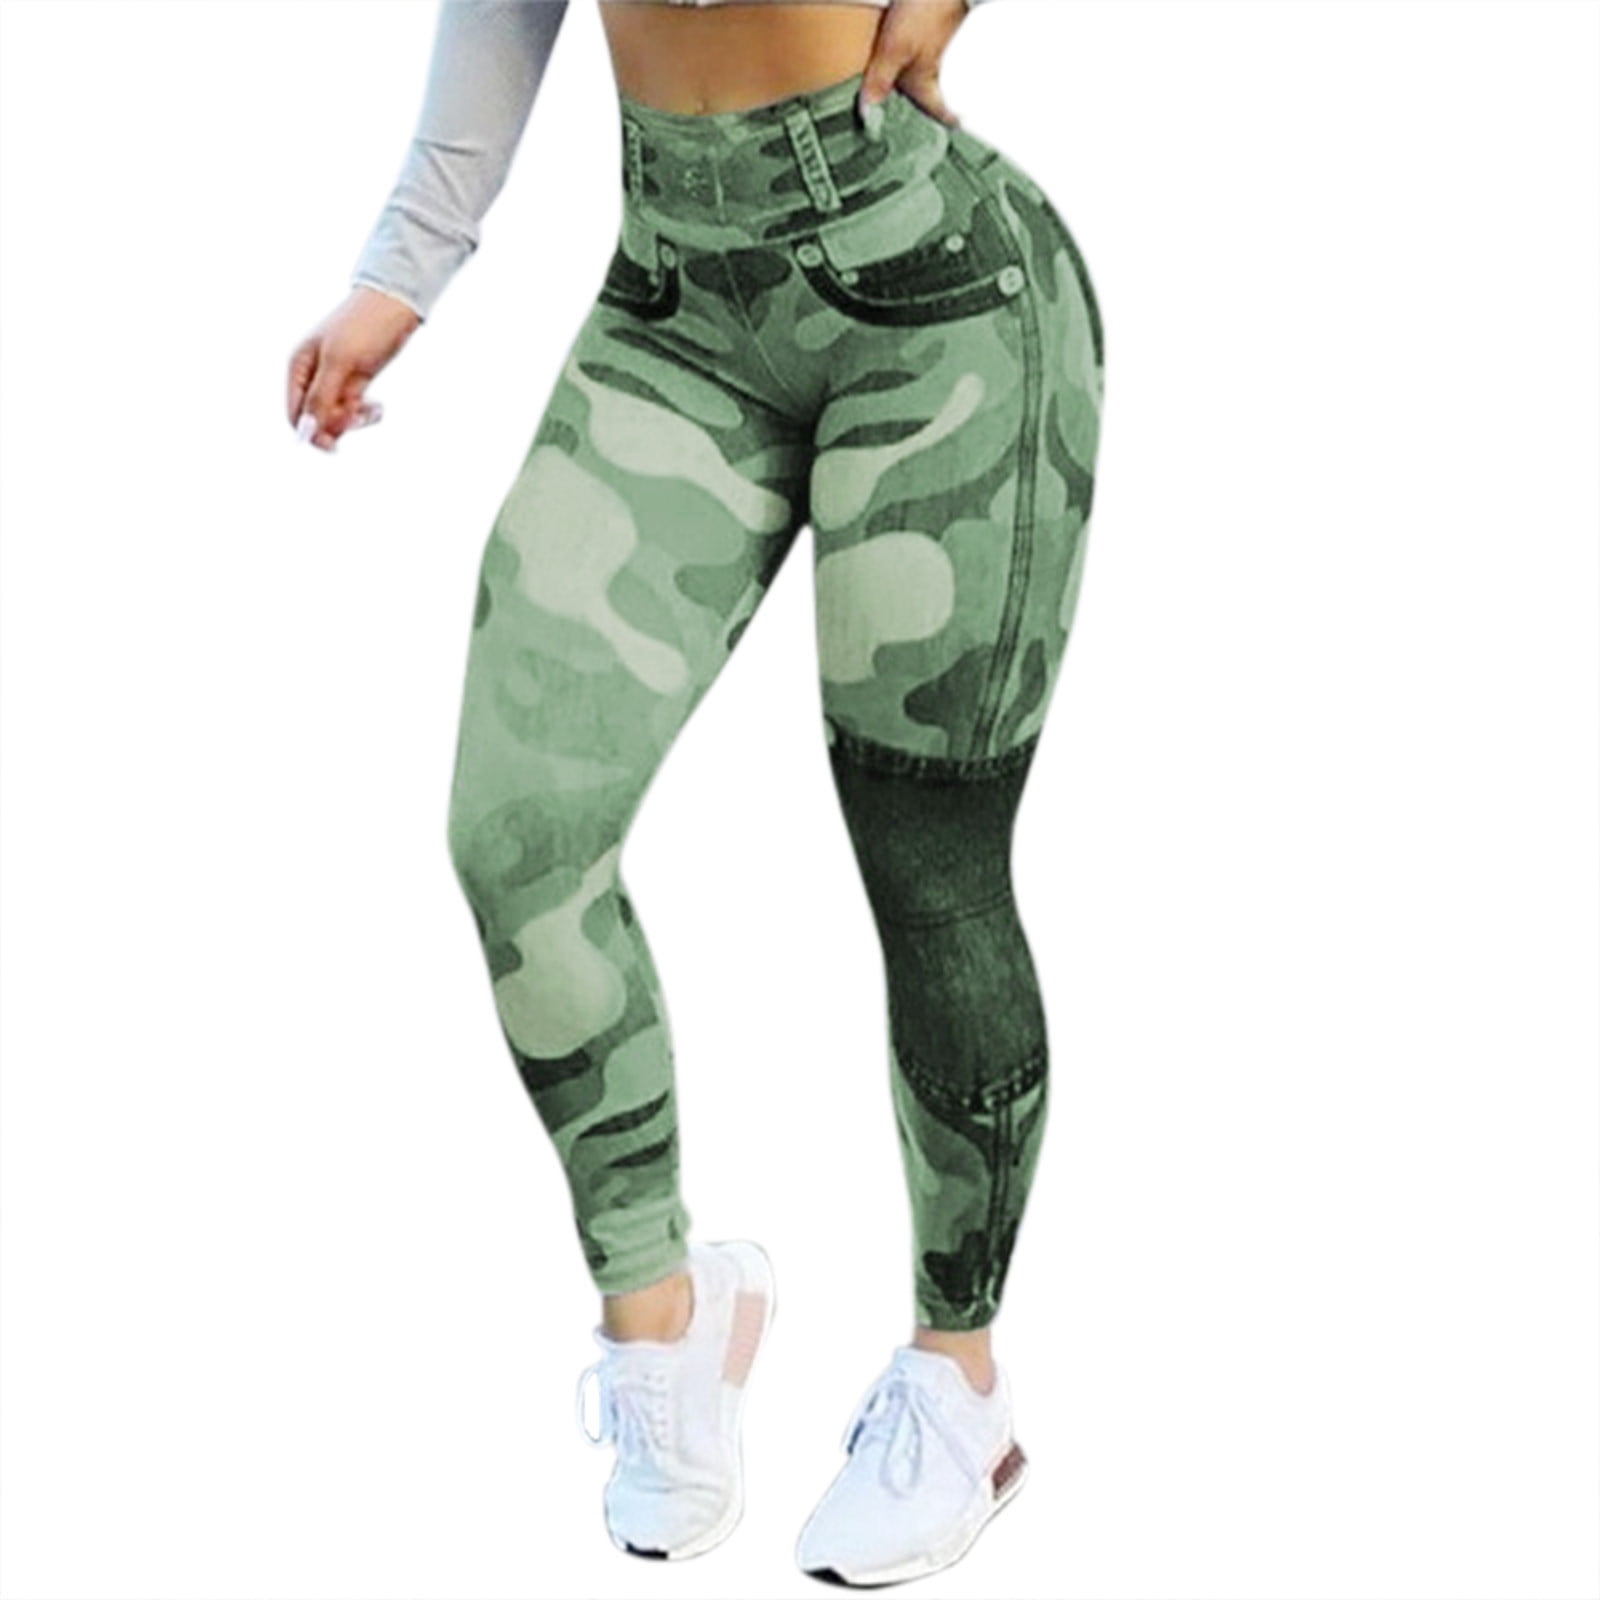  Conceited Camo Print Plus Size Leggings For Women